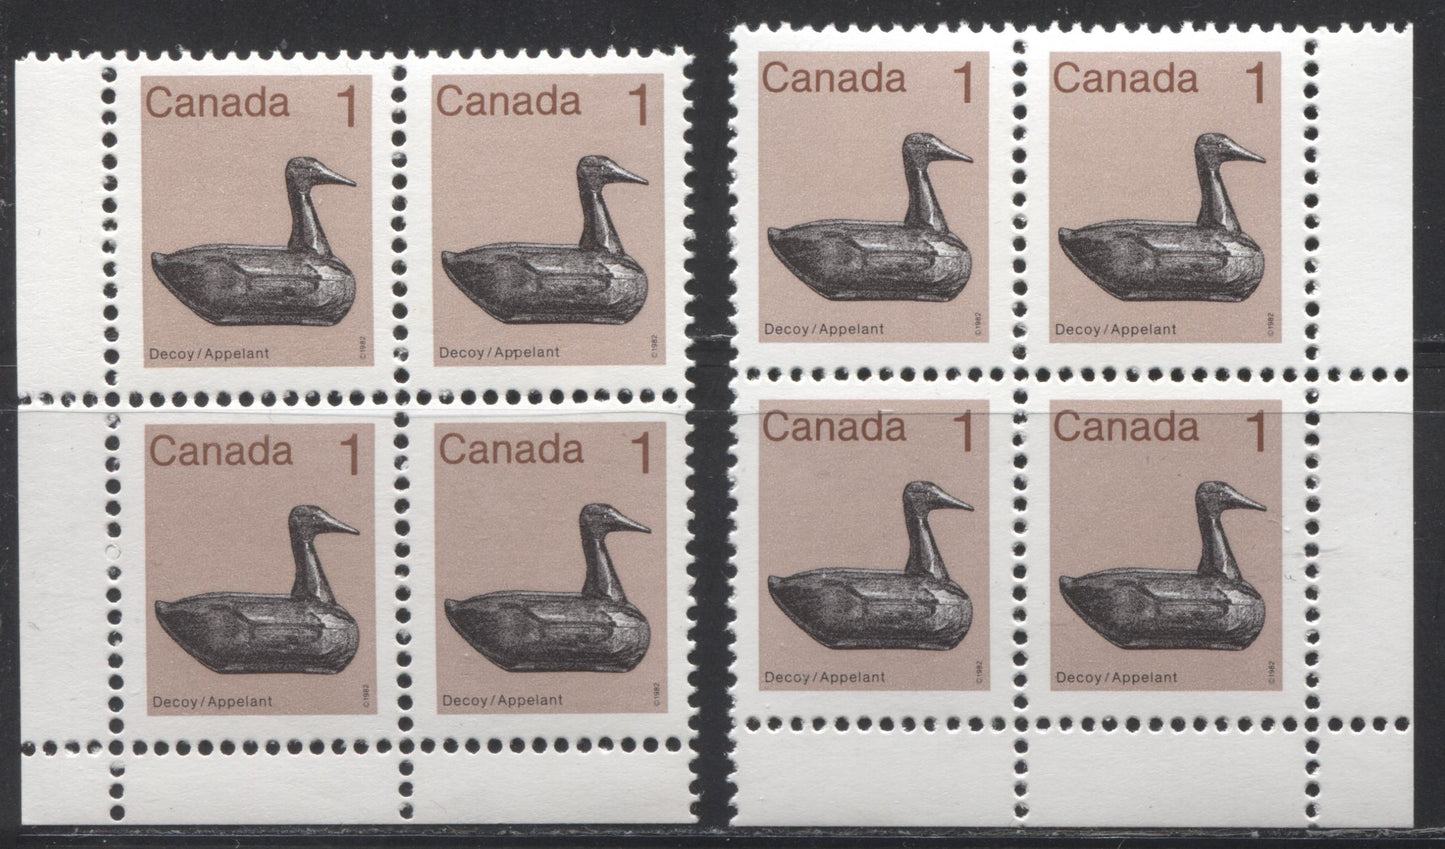 Canada #917aii 1c Multicoloured Decoy, 1982-1987 Artifacts and National Parks Issue, VFNH LL & LR Field Stock Blocks on Dead/DF Clark Paper, With Large Perforation Holes